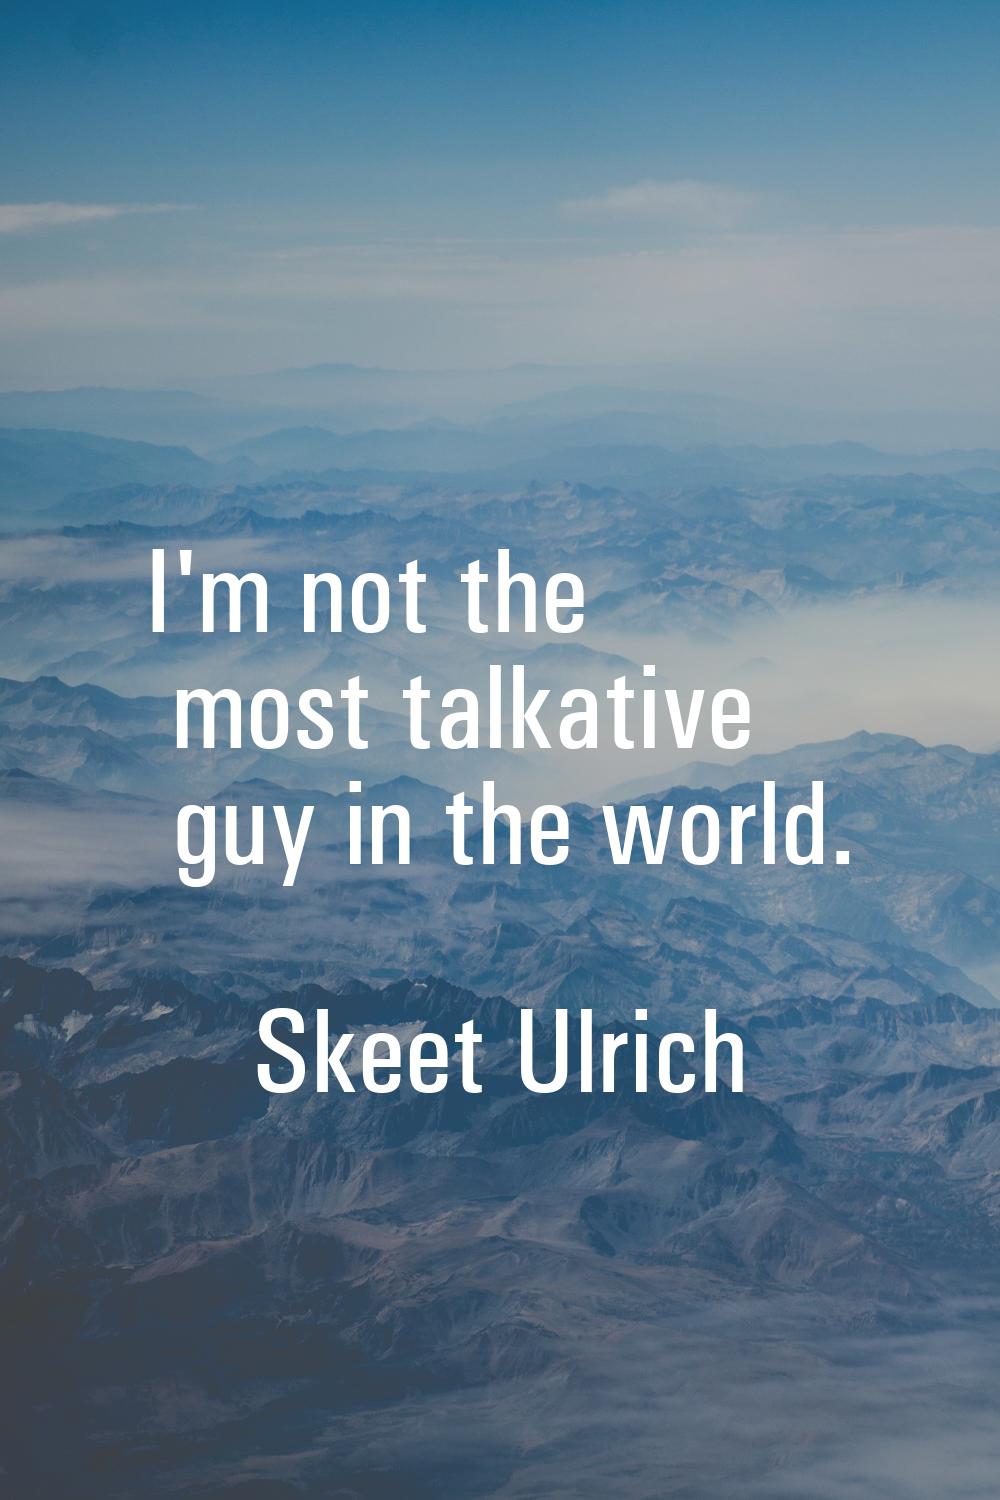 I'm not the most talkative guy in the world.